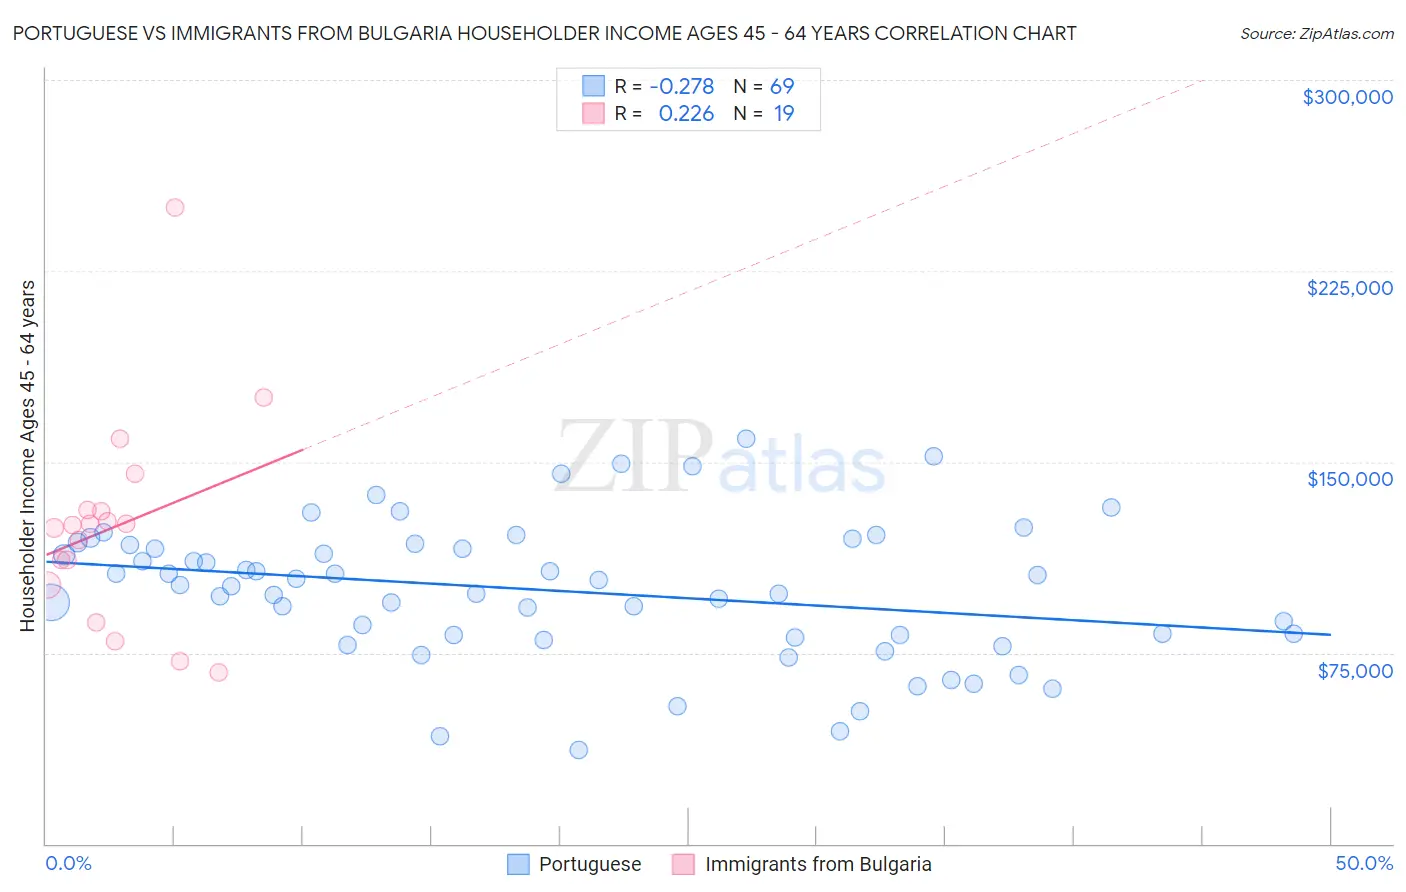 Portuguese vs Immigrants from Bulgaria Householder Income Ages 45 - 64 years